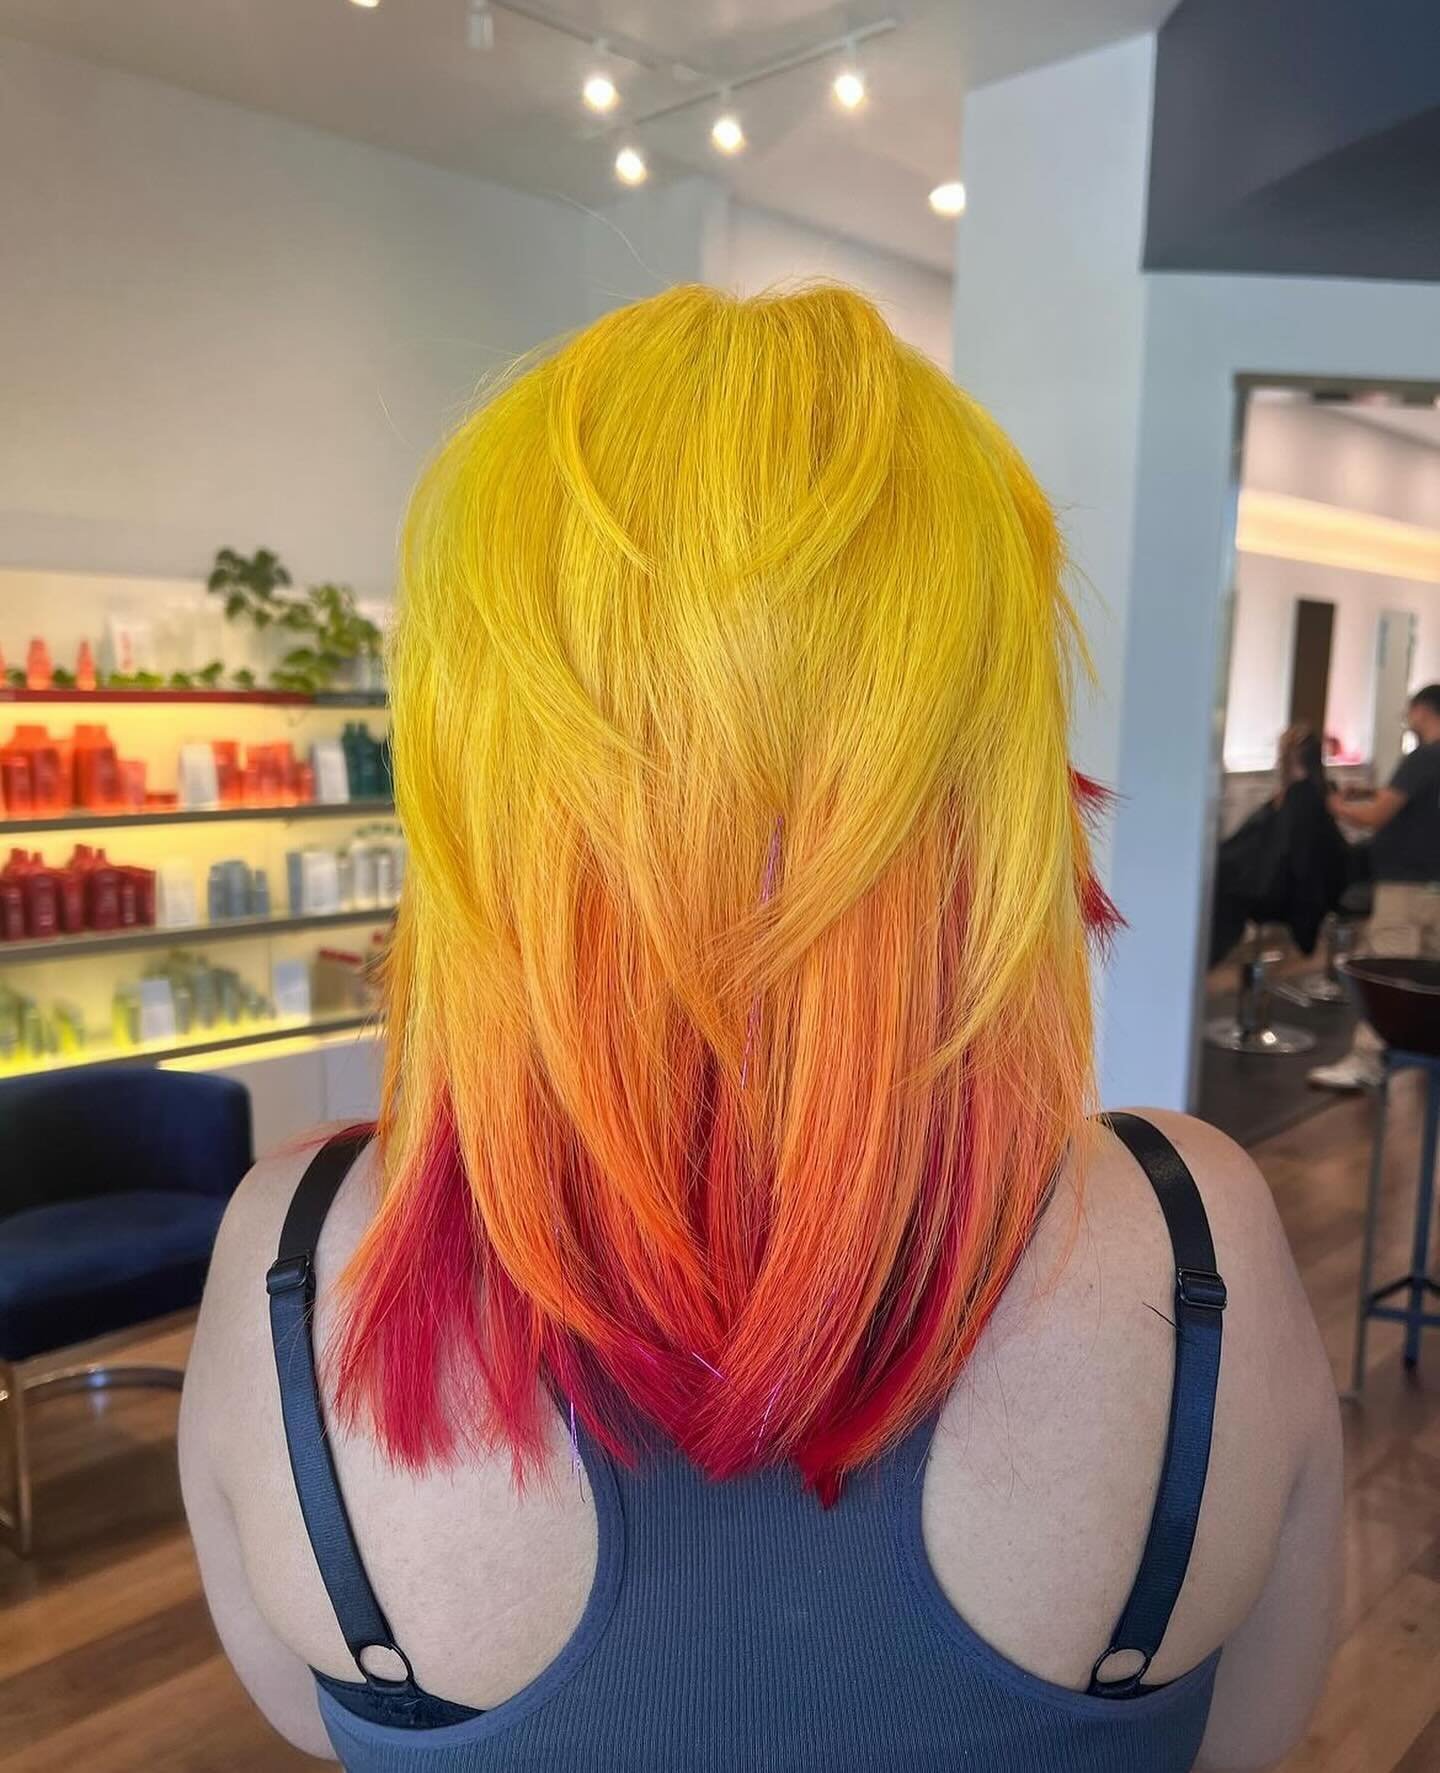 Actual 🔥 from @tydoeshair_atx at Circle C